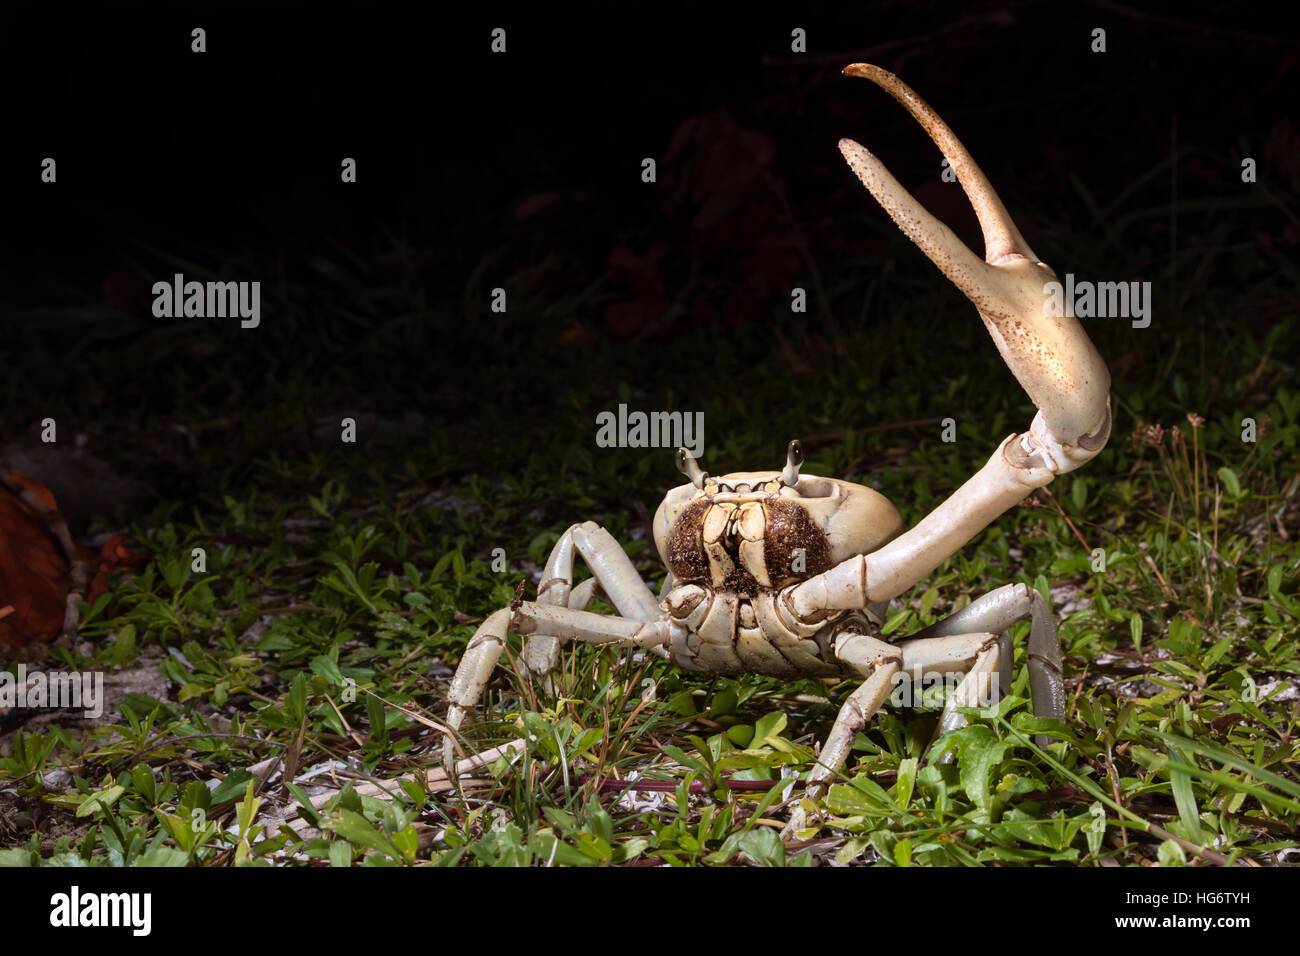 Blue land crab (Cardisoma guanhumi) in defensive posture at night, Caye Caulker Island, Belize, Central America Stock Photo